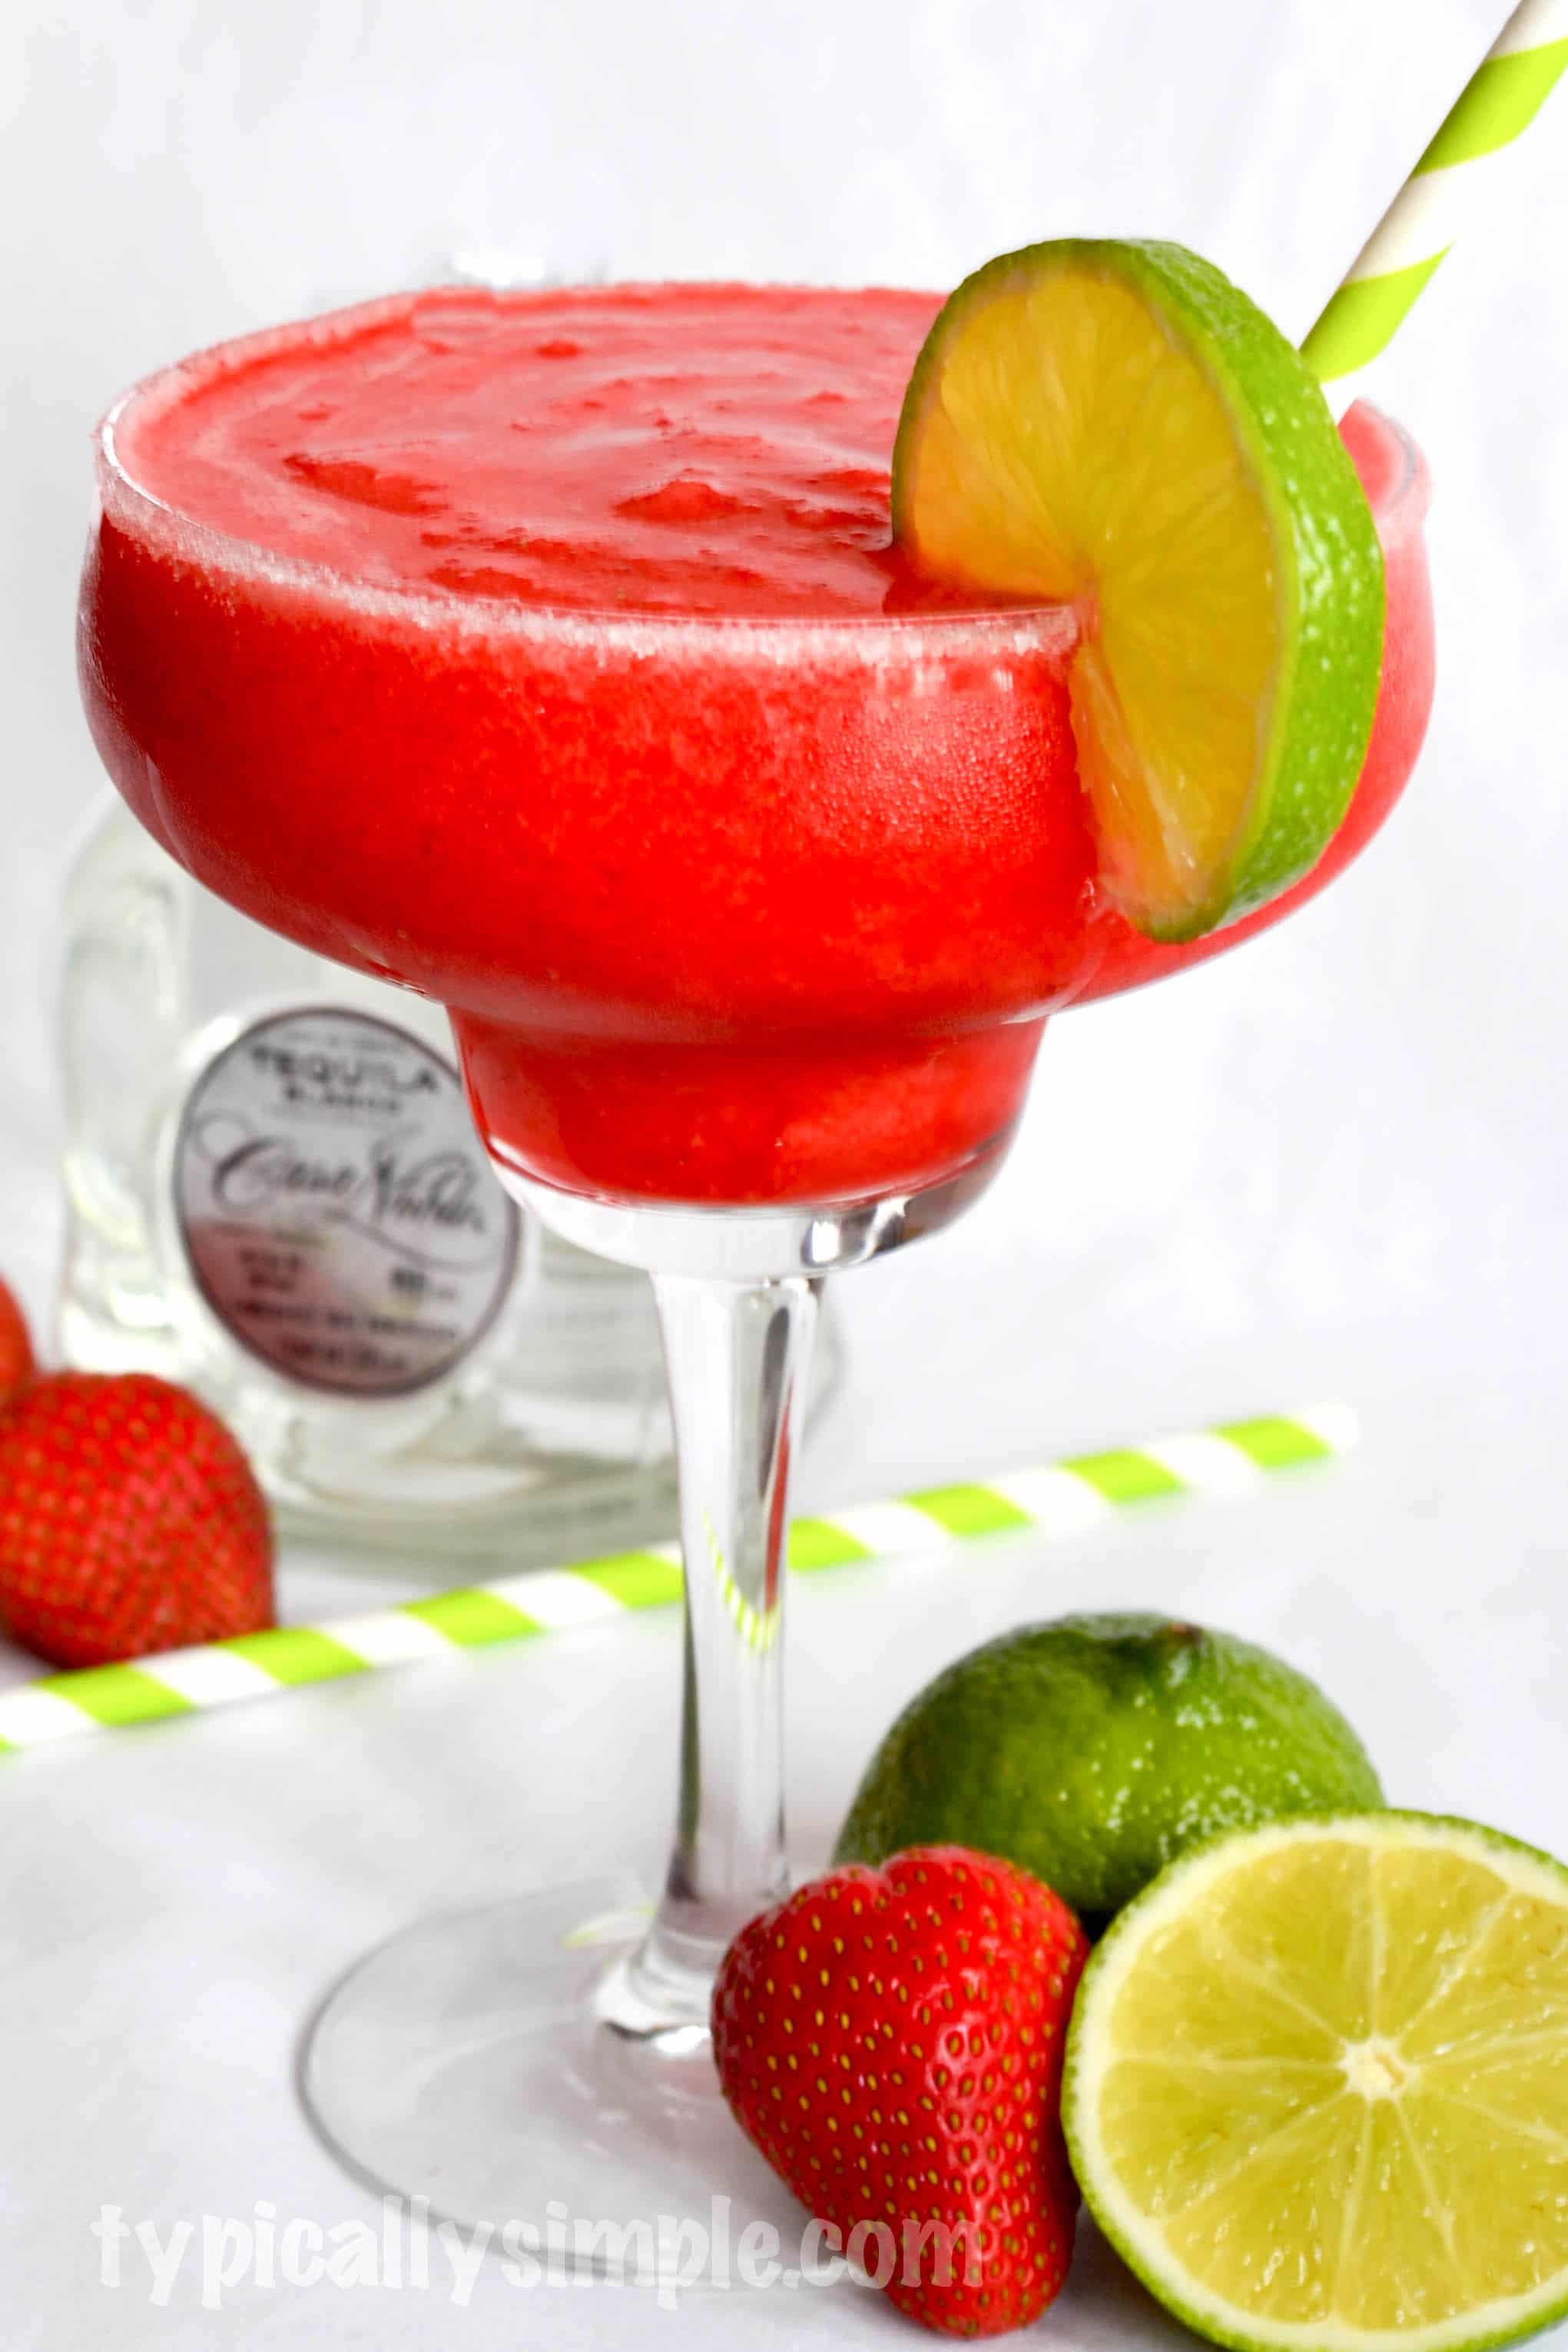 A delicious strawberry-lime margarita recipe that is easy to make and perfect to enjoy while relaxing by the pool or at the beach!